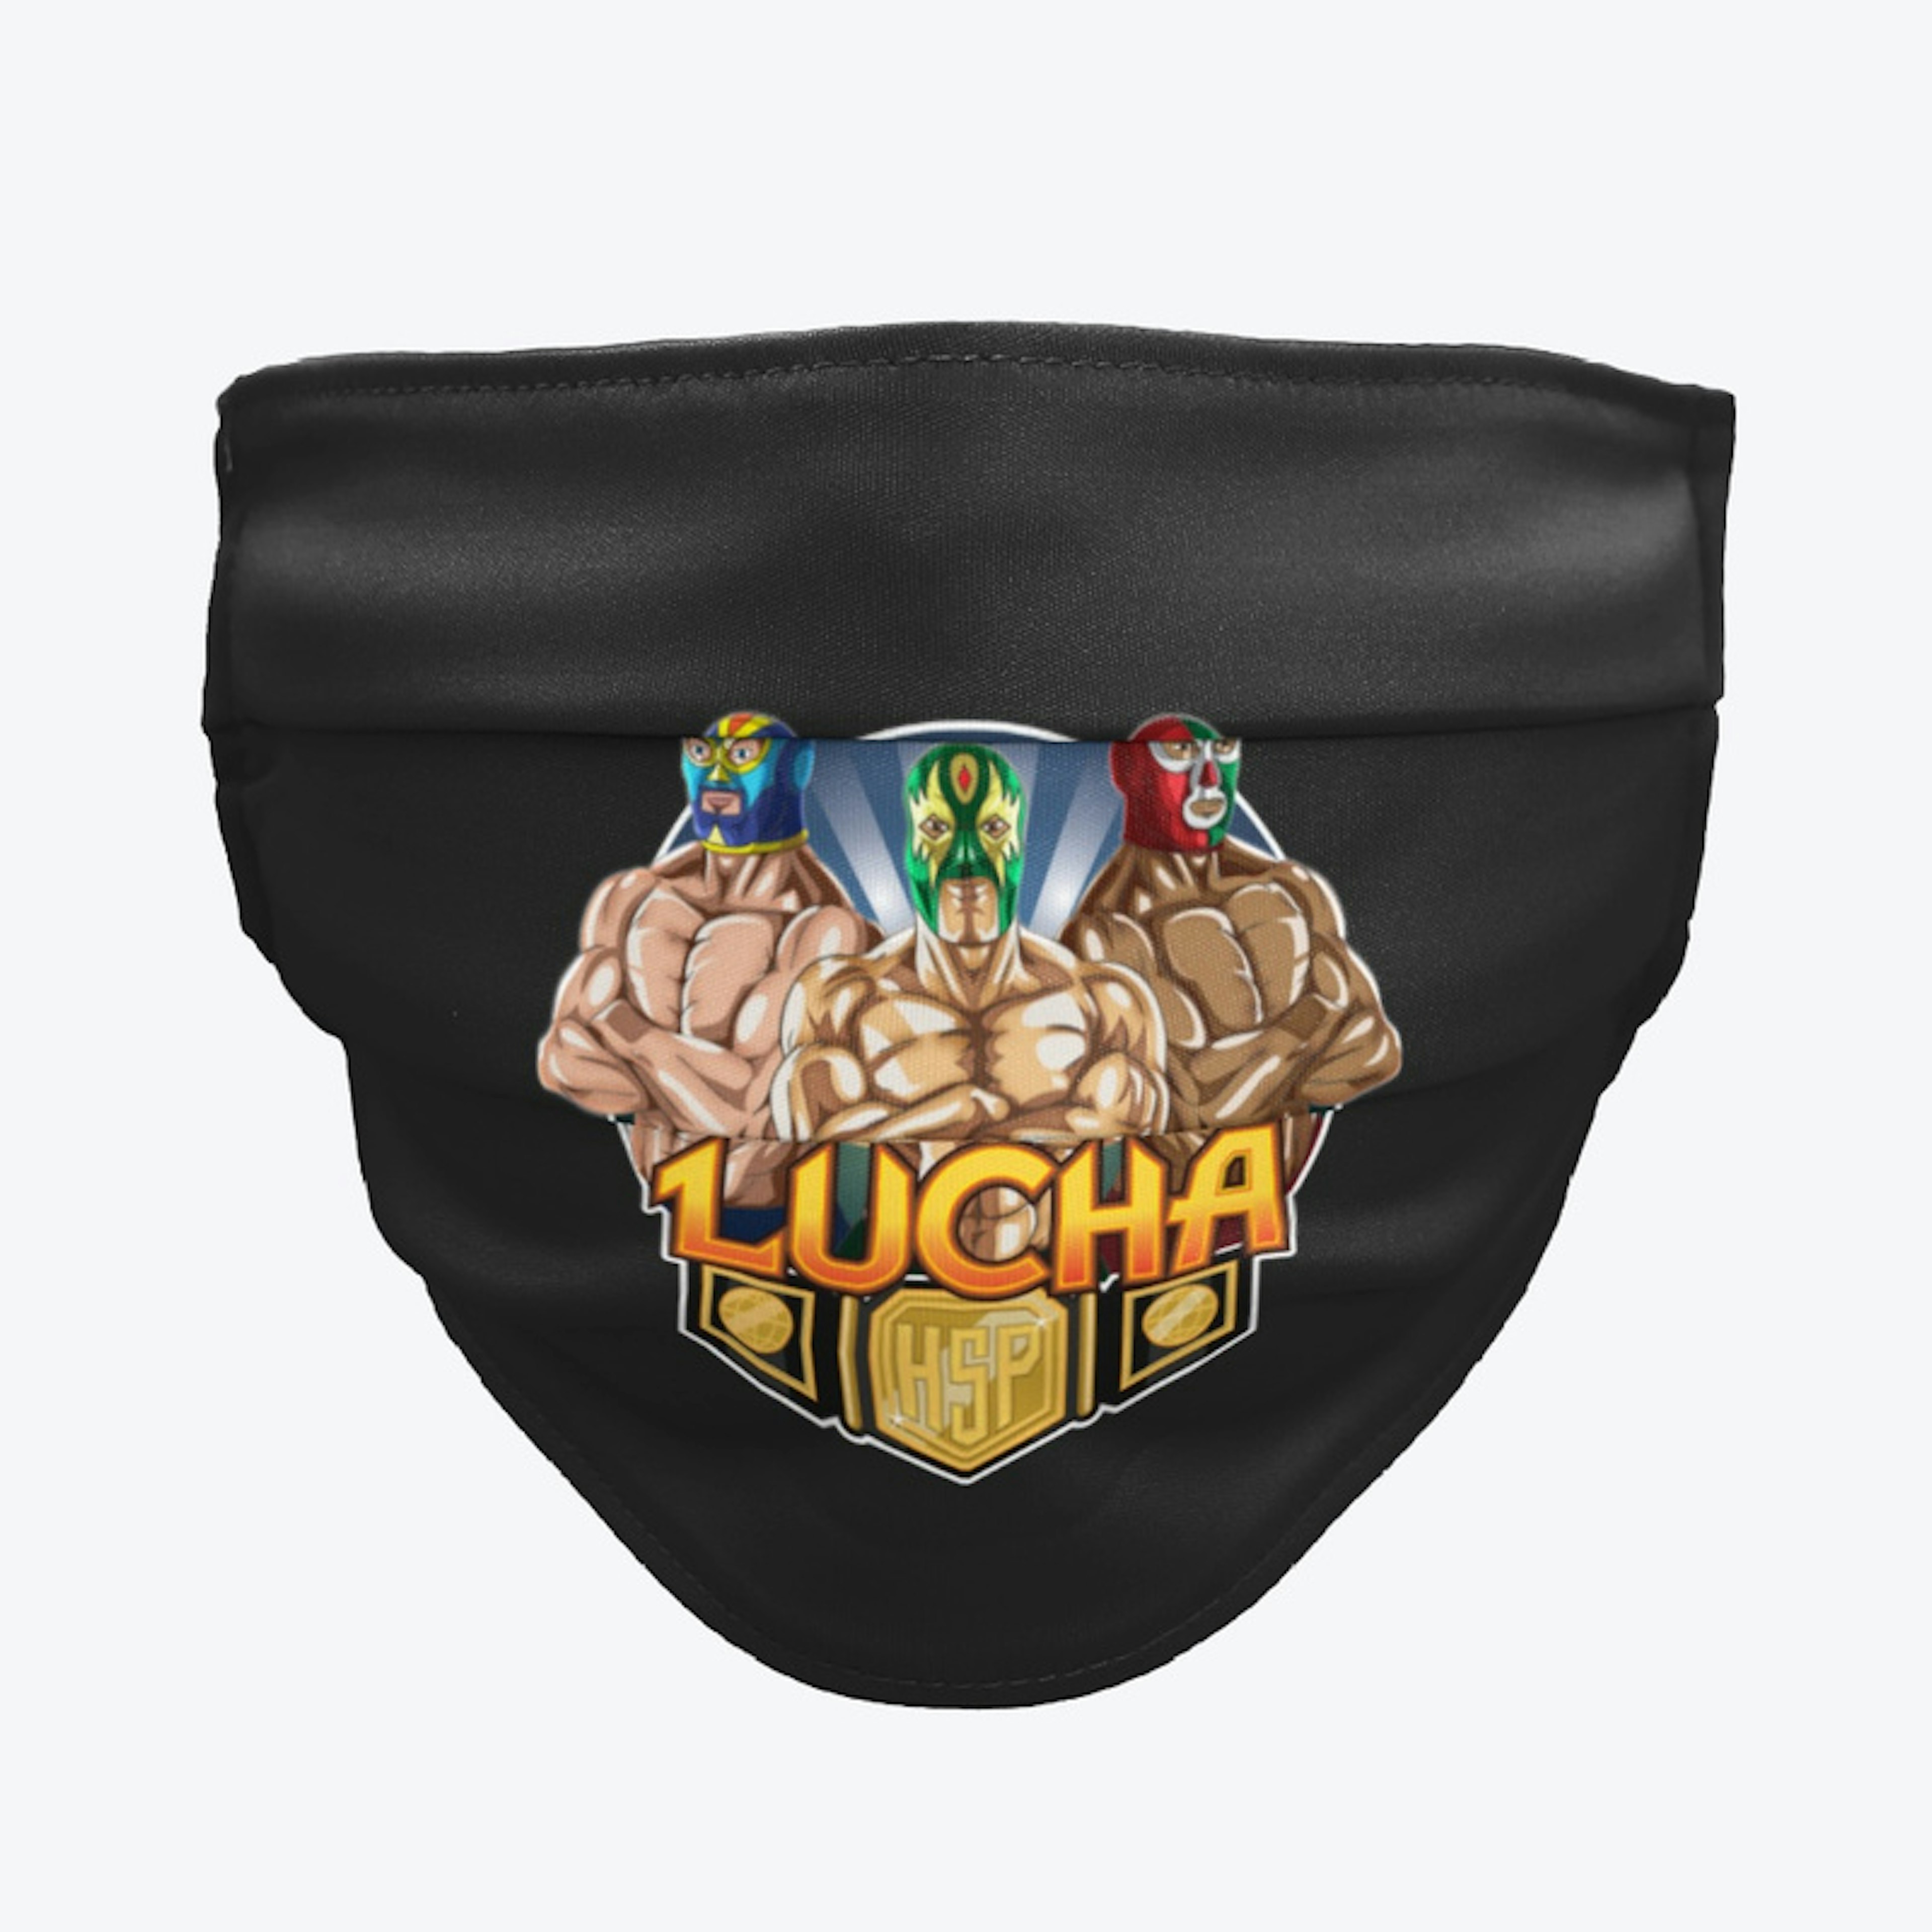 Lucha HSP Store